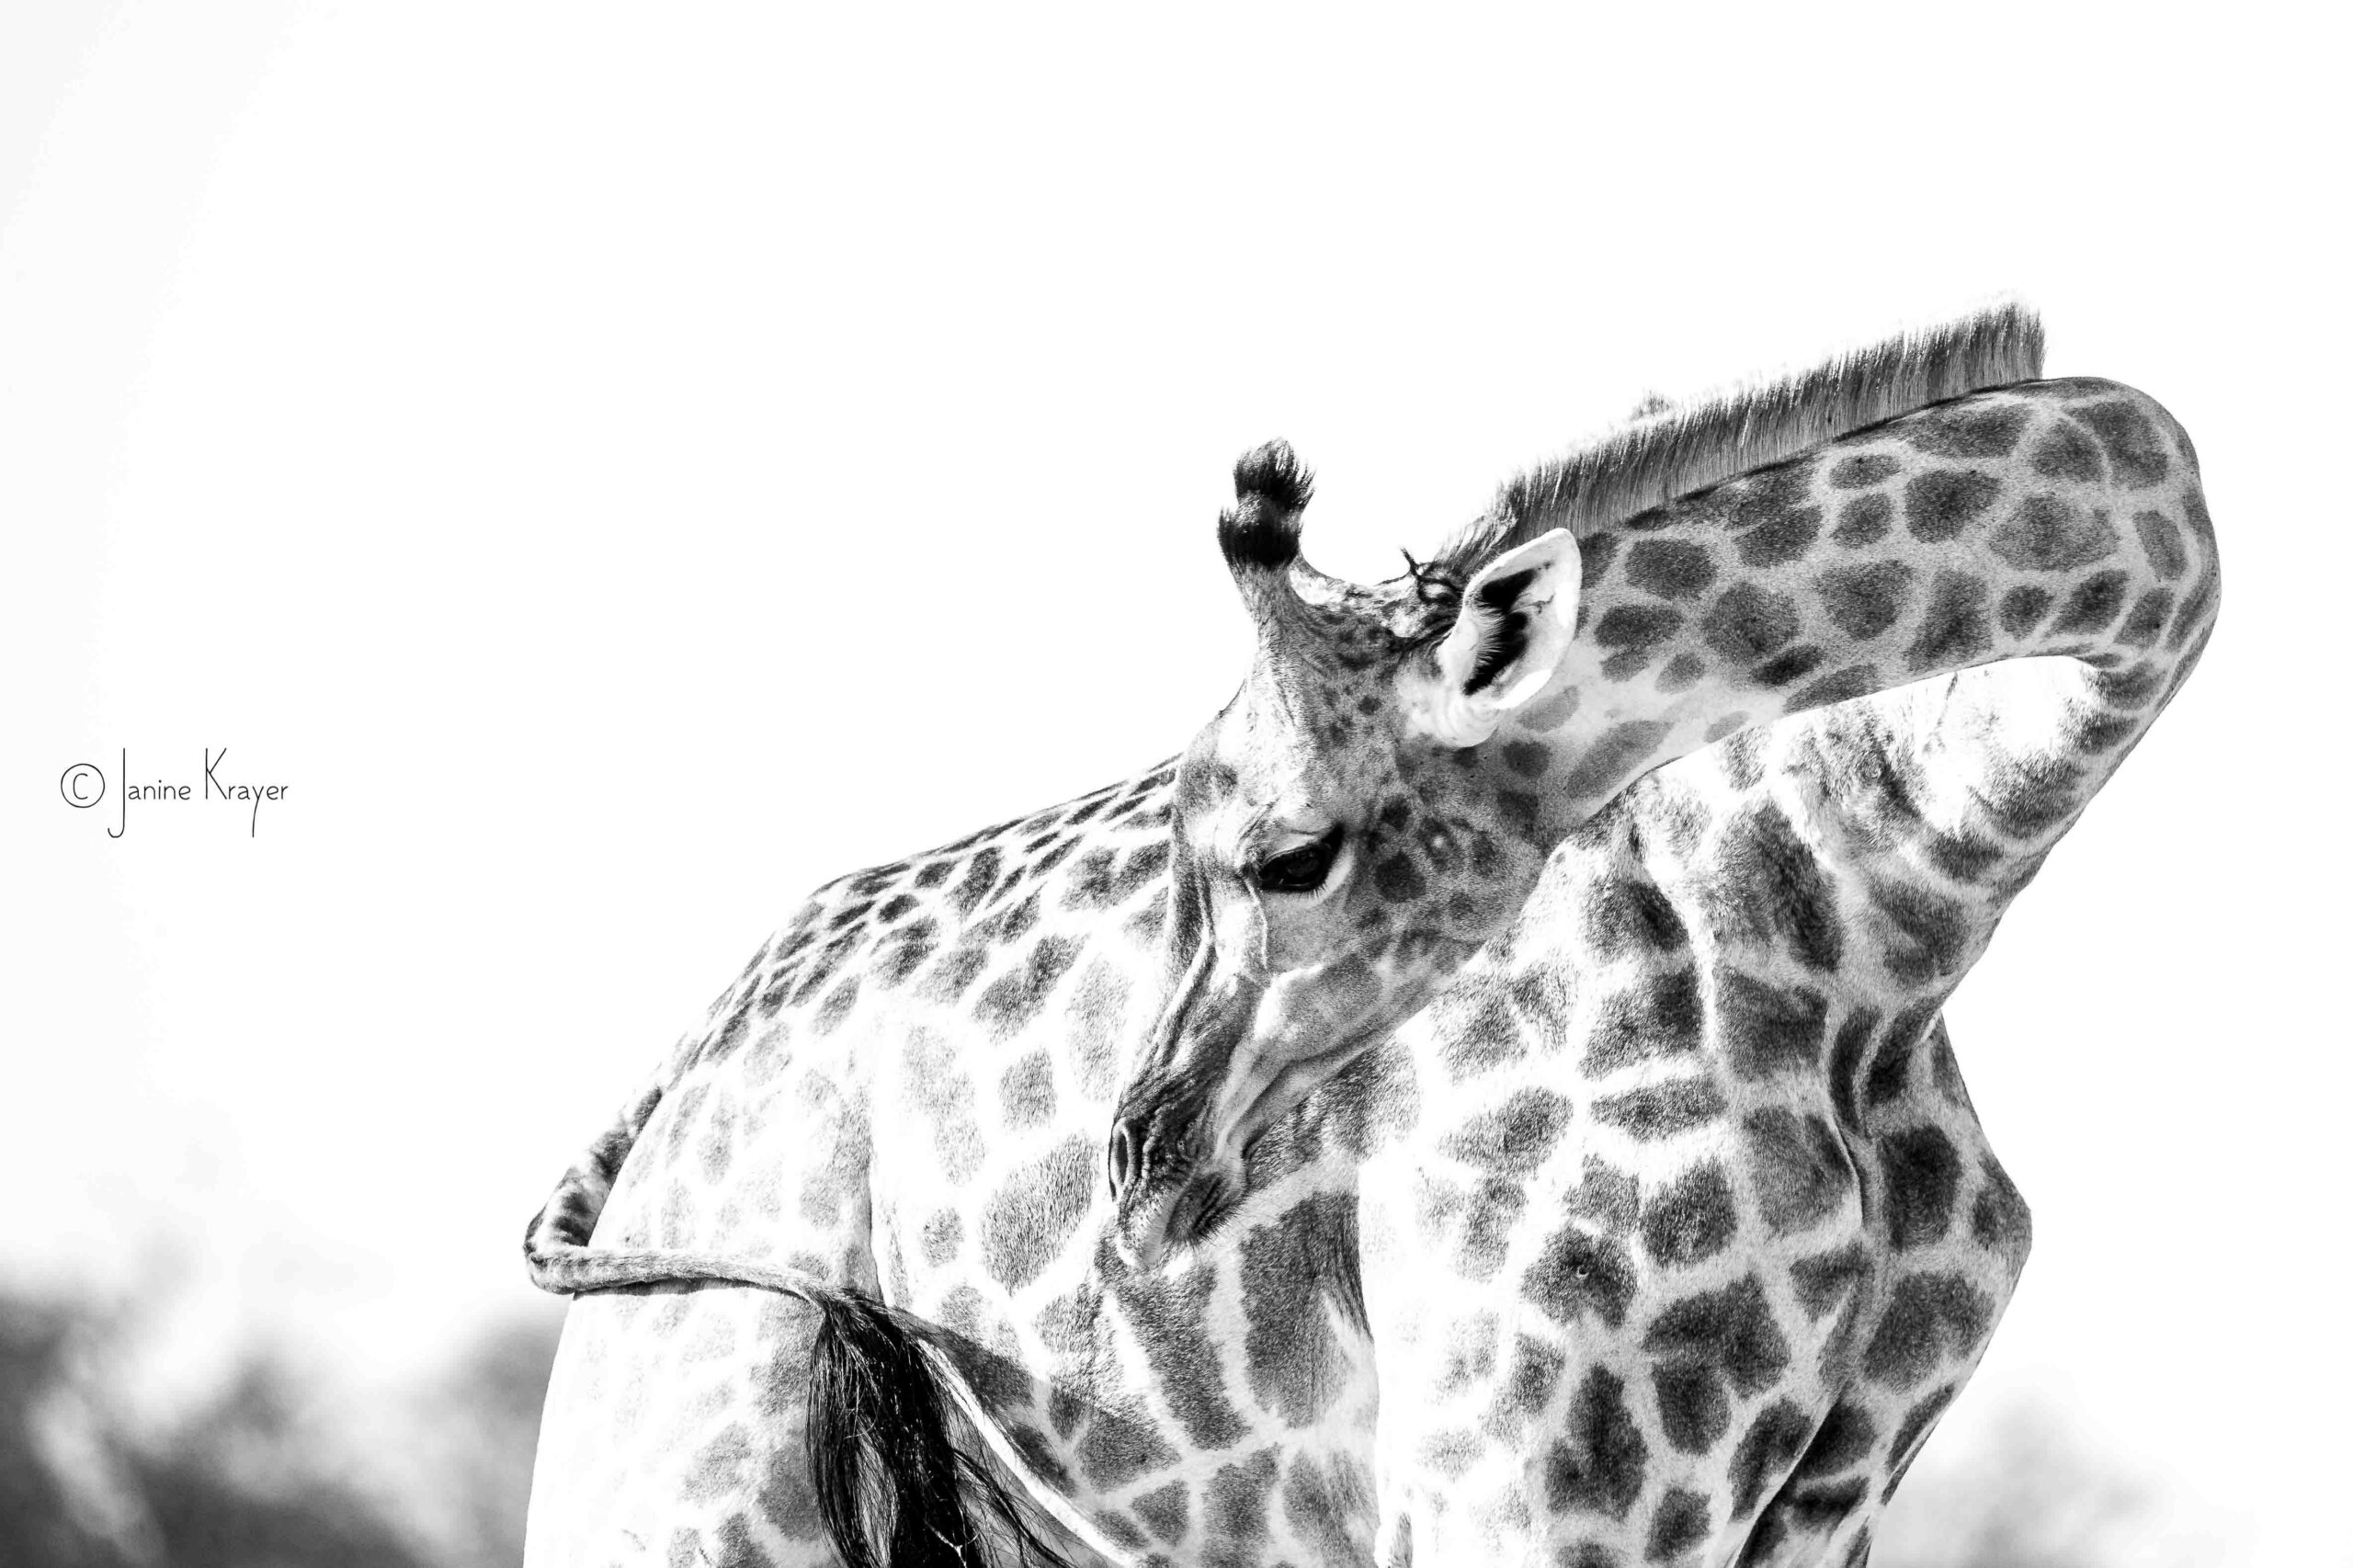 janine's giraffe looking behind in black and white